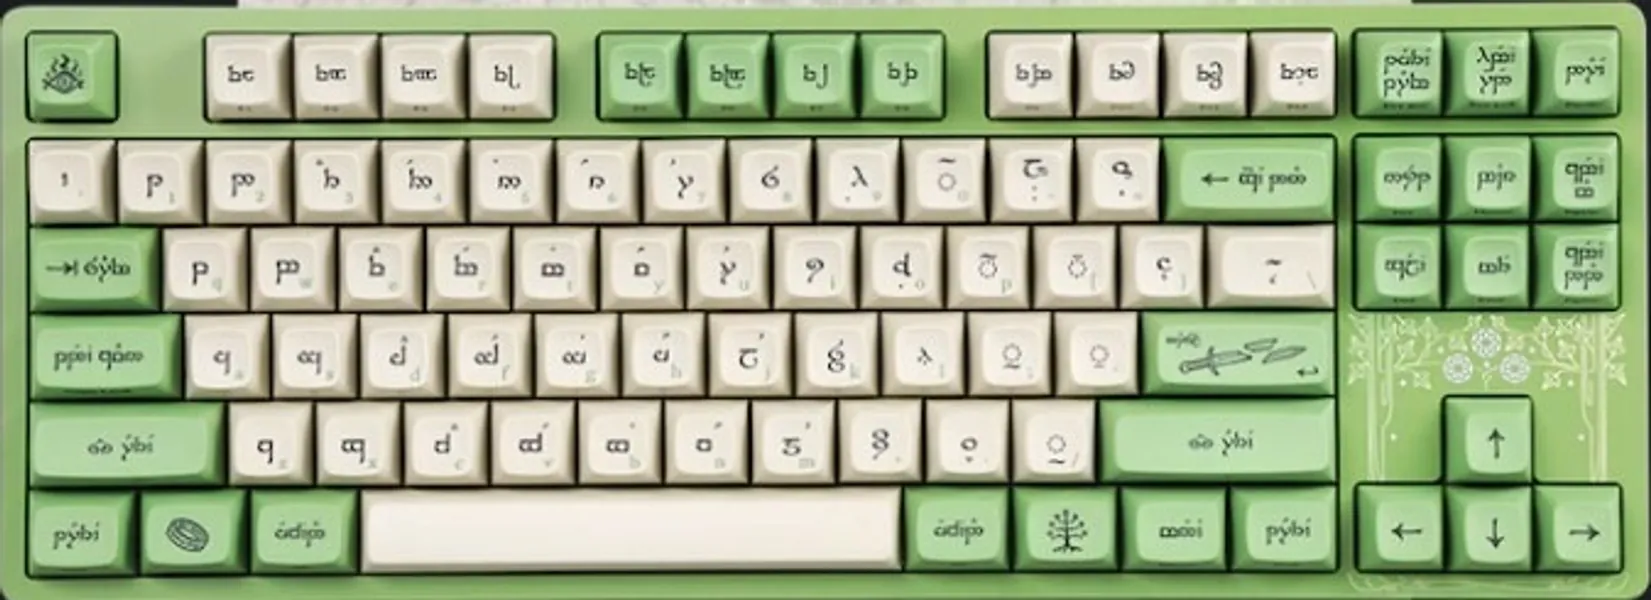 Lord of the Rings Keyboard